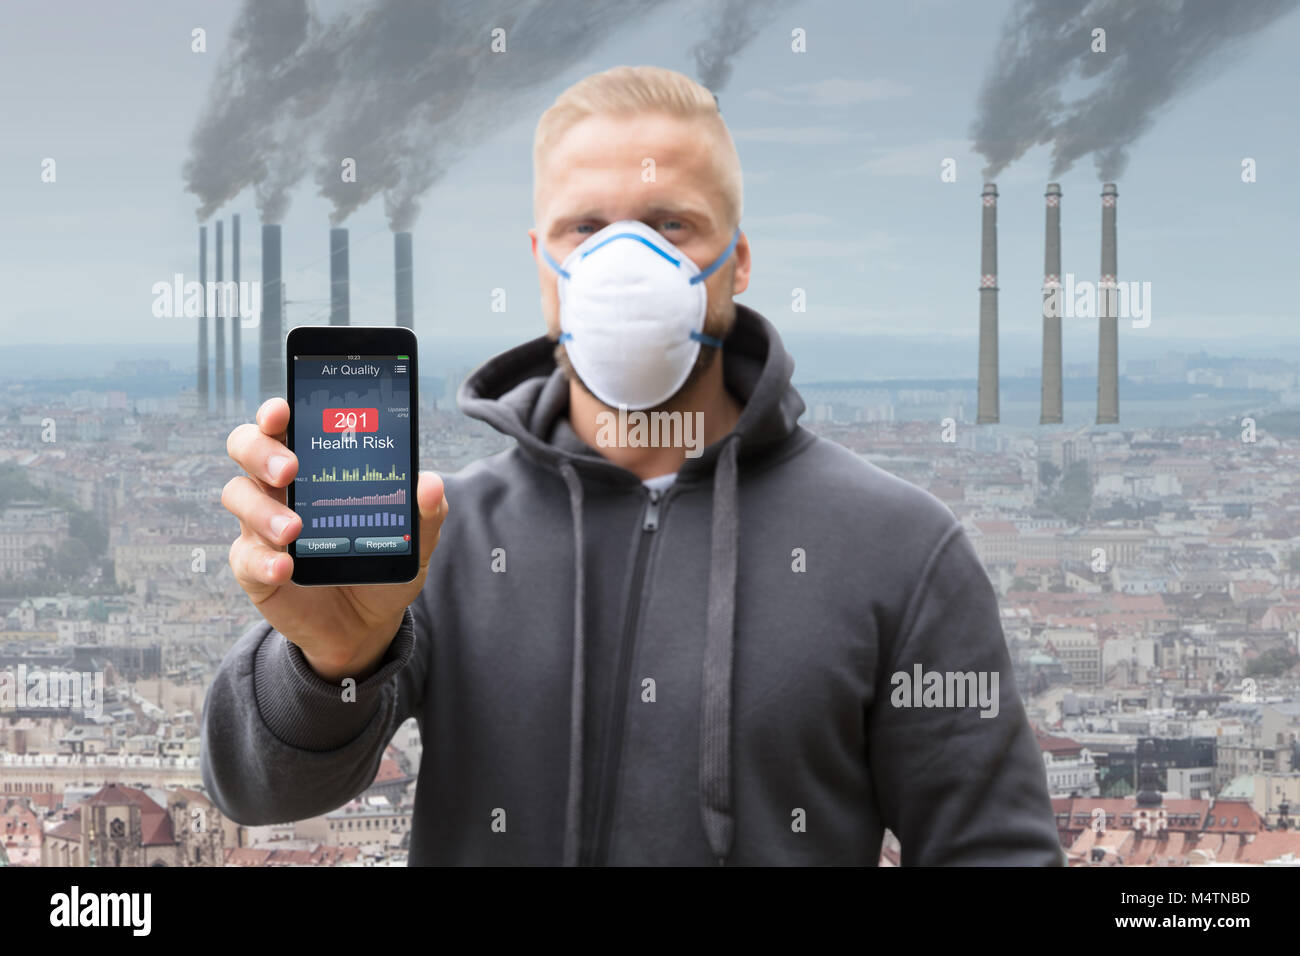 Man Showing Health Risk Rate On Cell Phone Against Smoke Emitting From Factory Chimneys Stock Photo